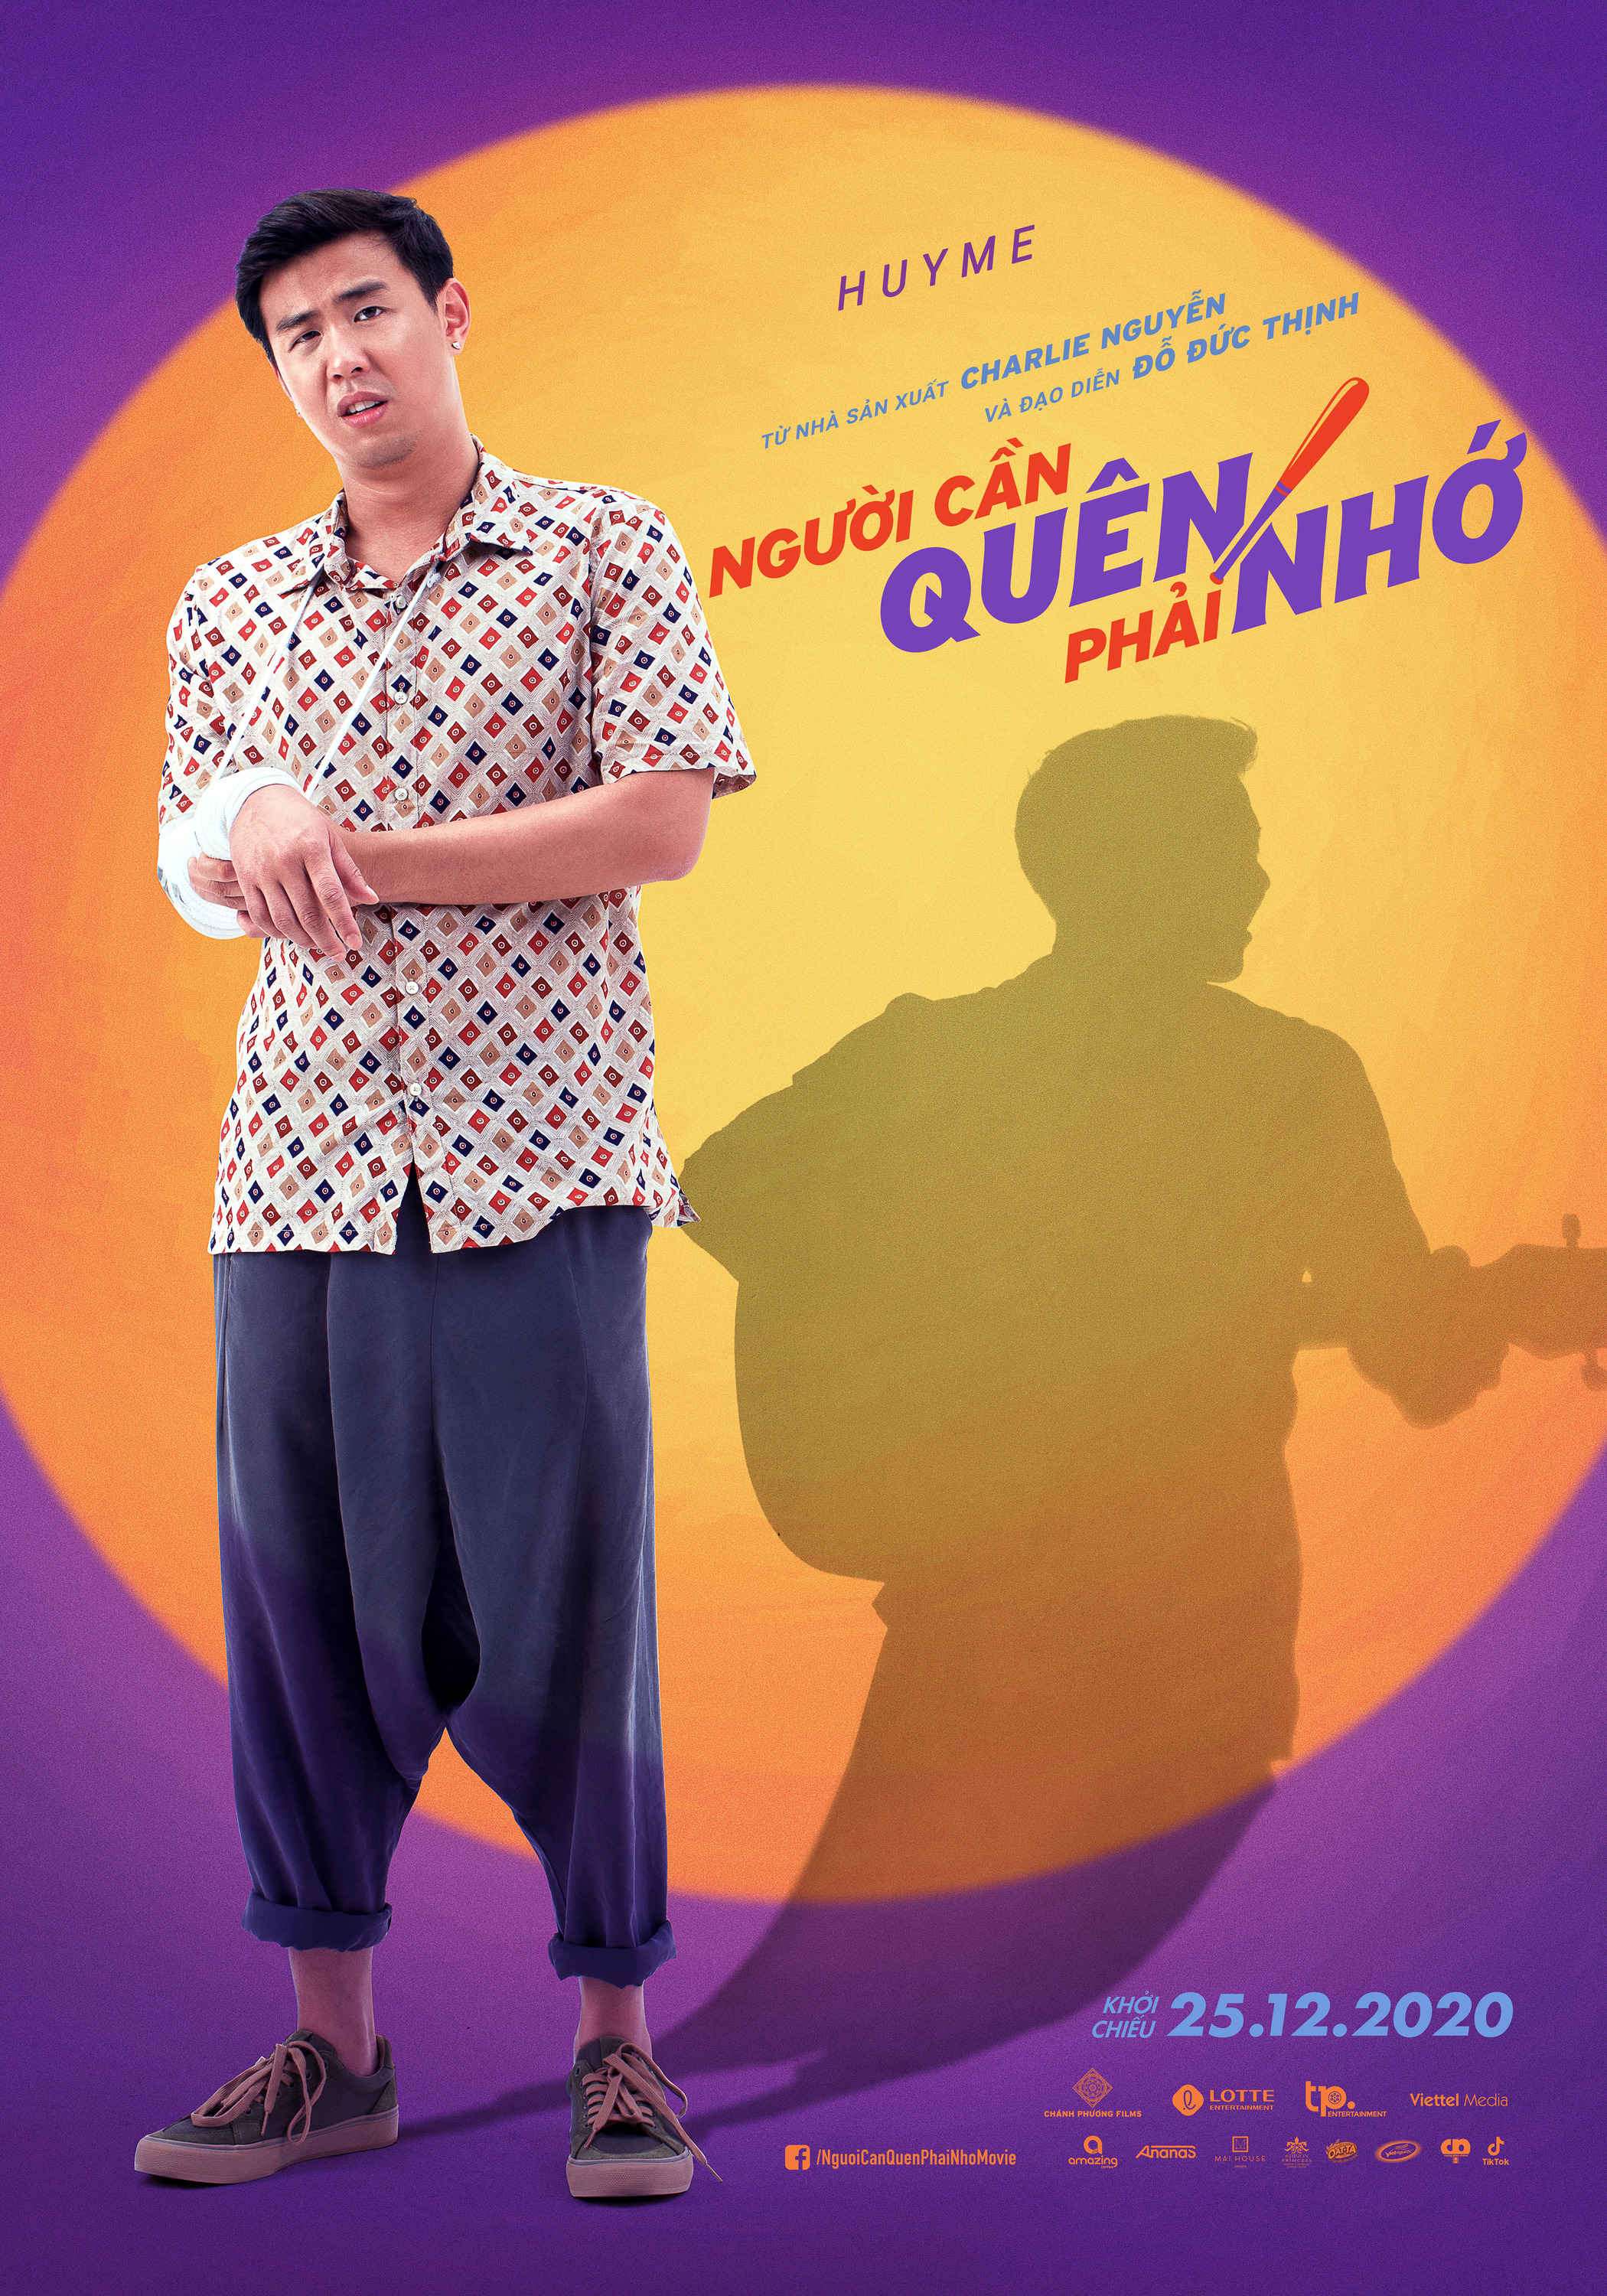 Mega Sized Movie Poster Image for Nguoi Can Quen Phai Nho (#7 of 10)